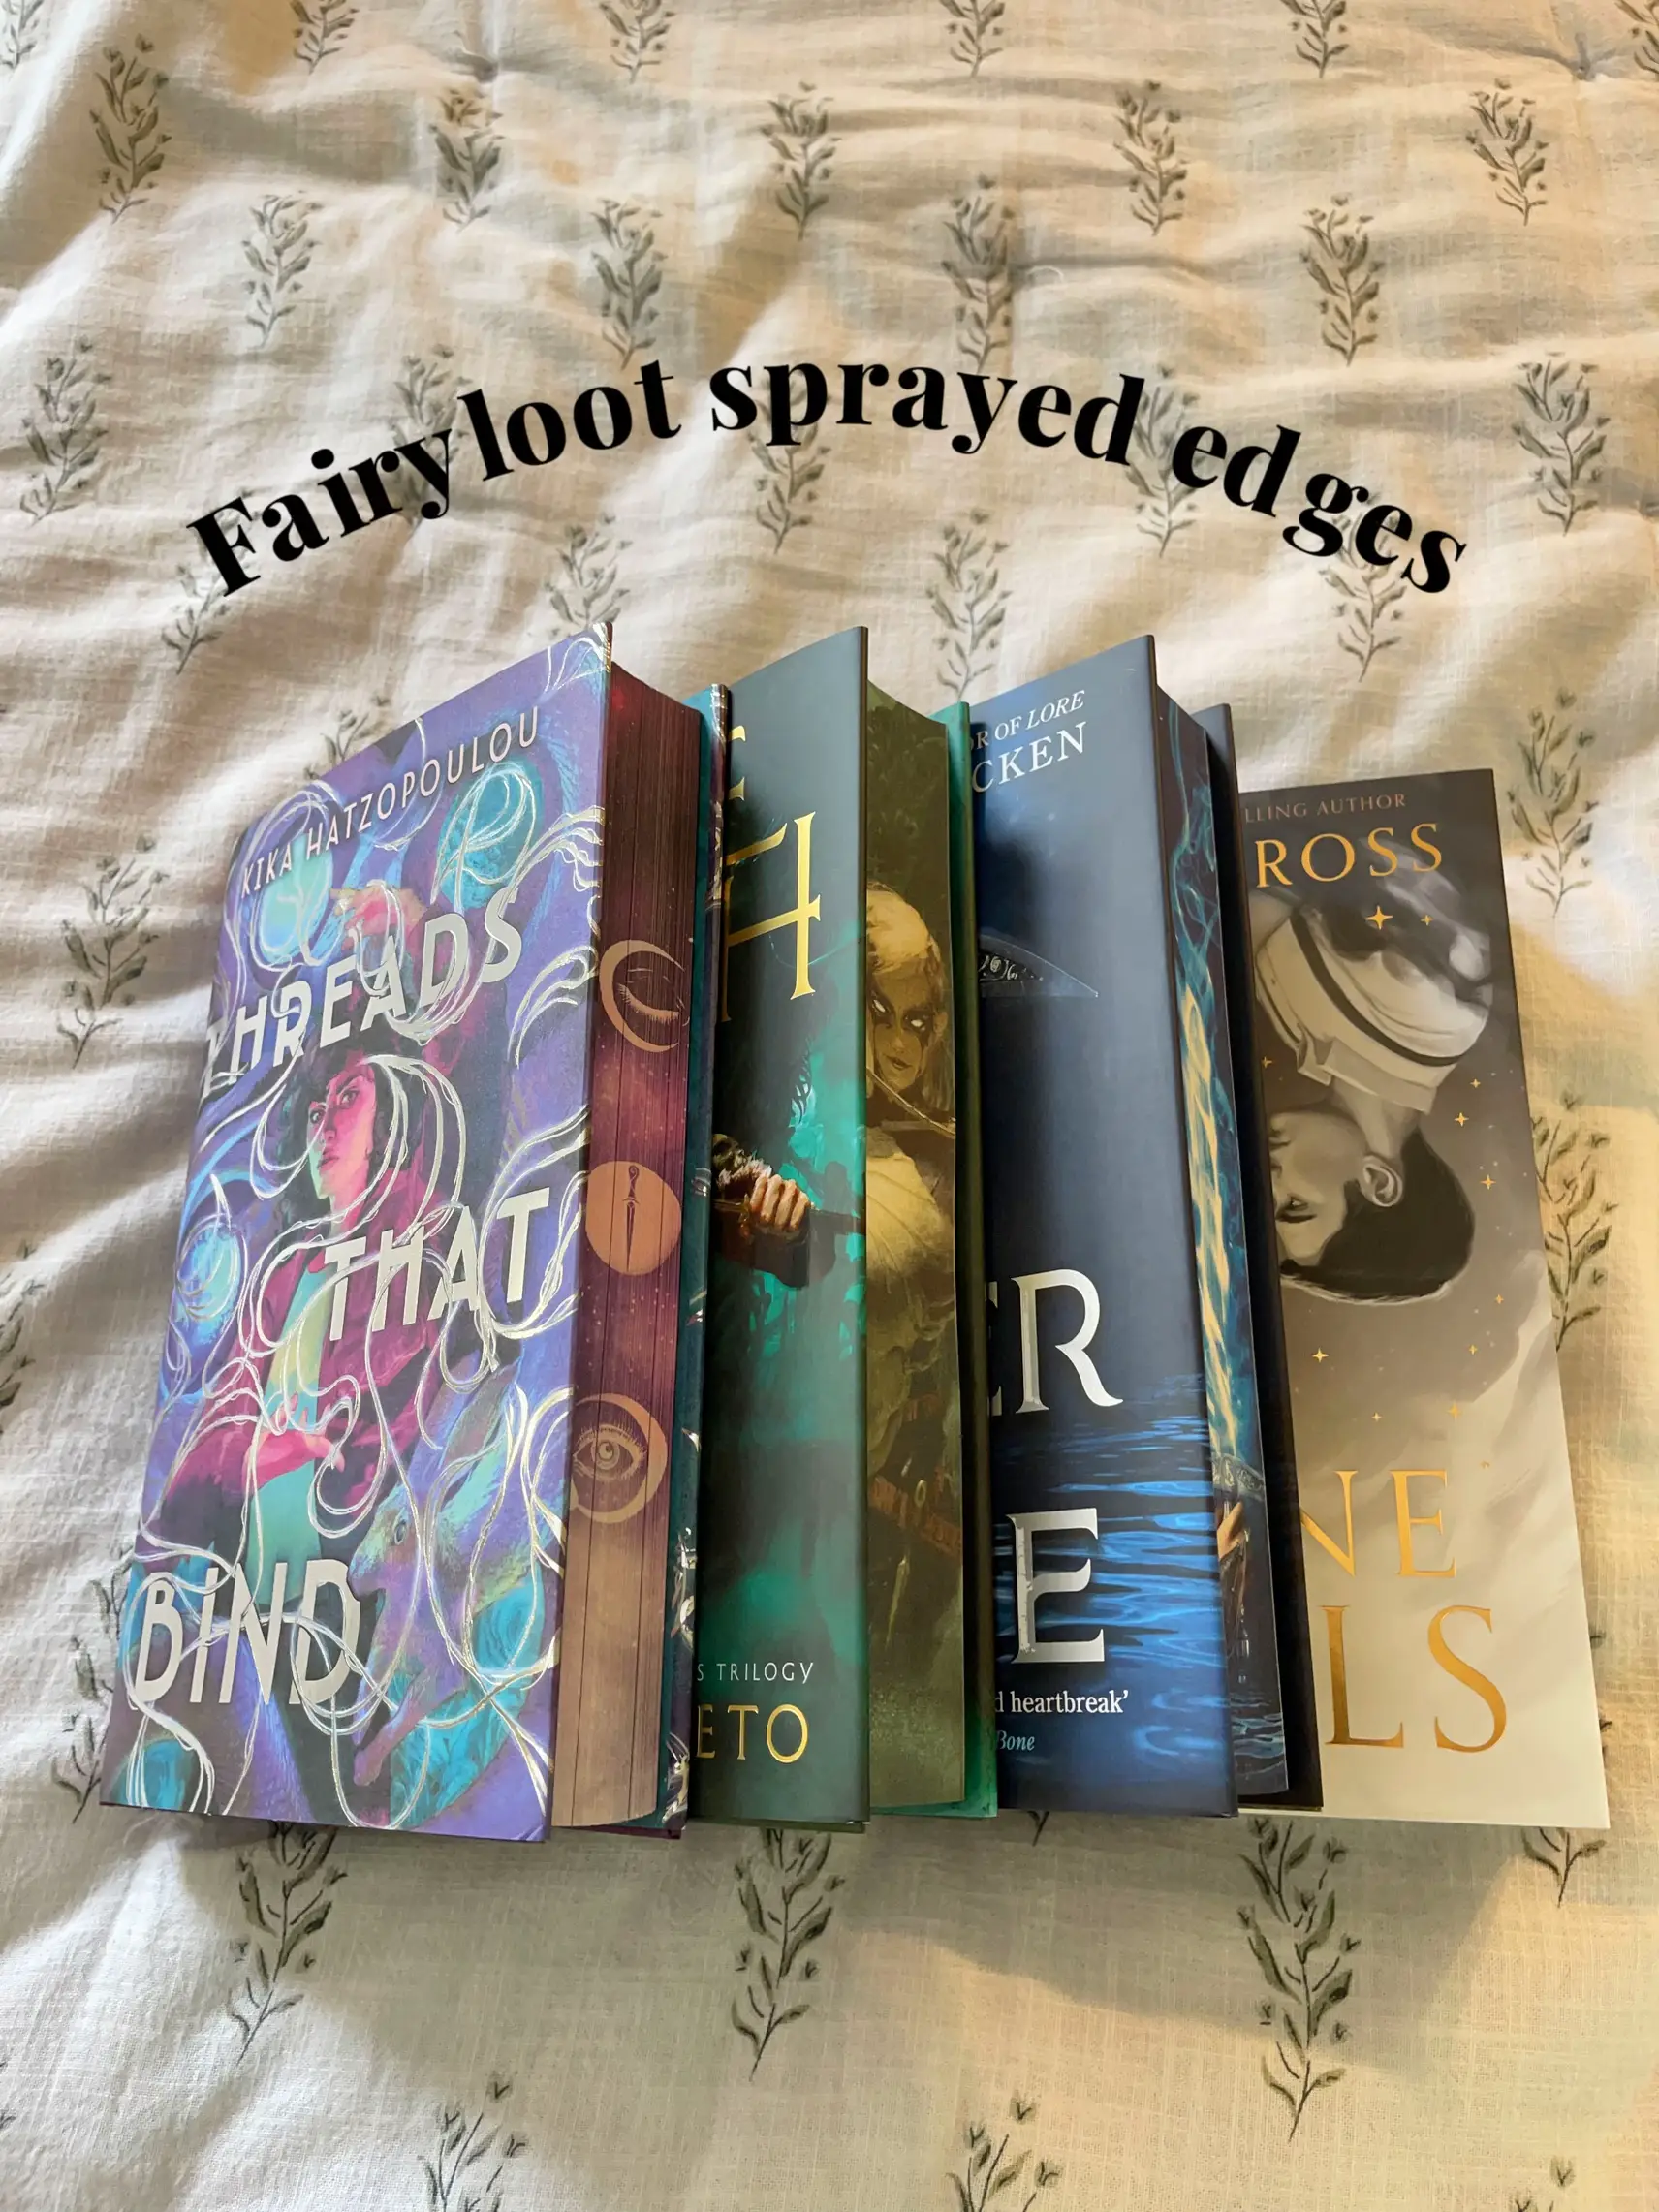 FairyLoot - Look at this GORGEOUS stack of FairyLoot books! We're  absolutely obsessed with sprayed edges and many of the books we feature  have them. These are just some of the ones